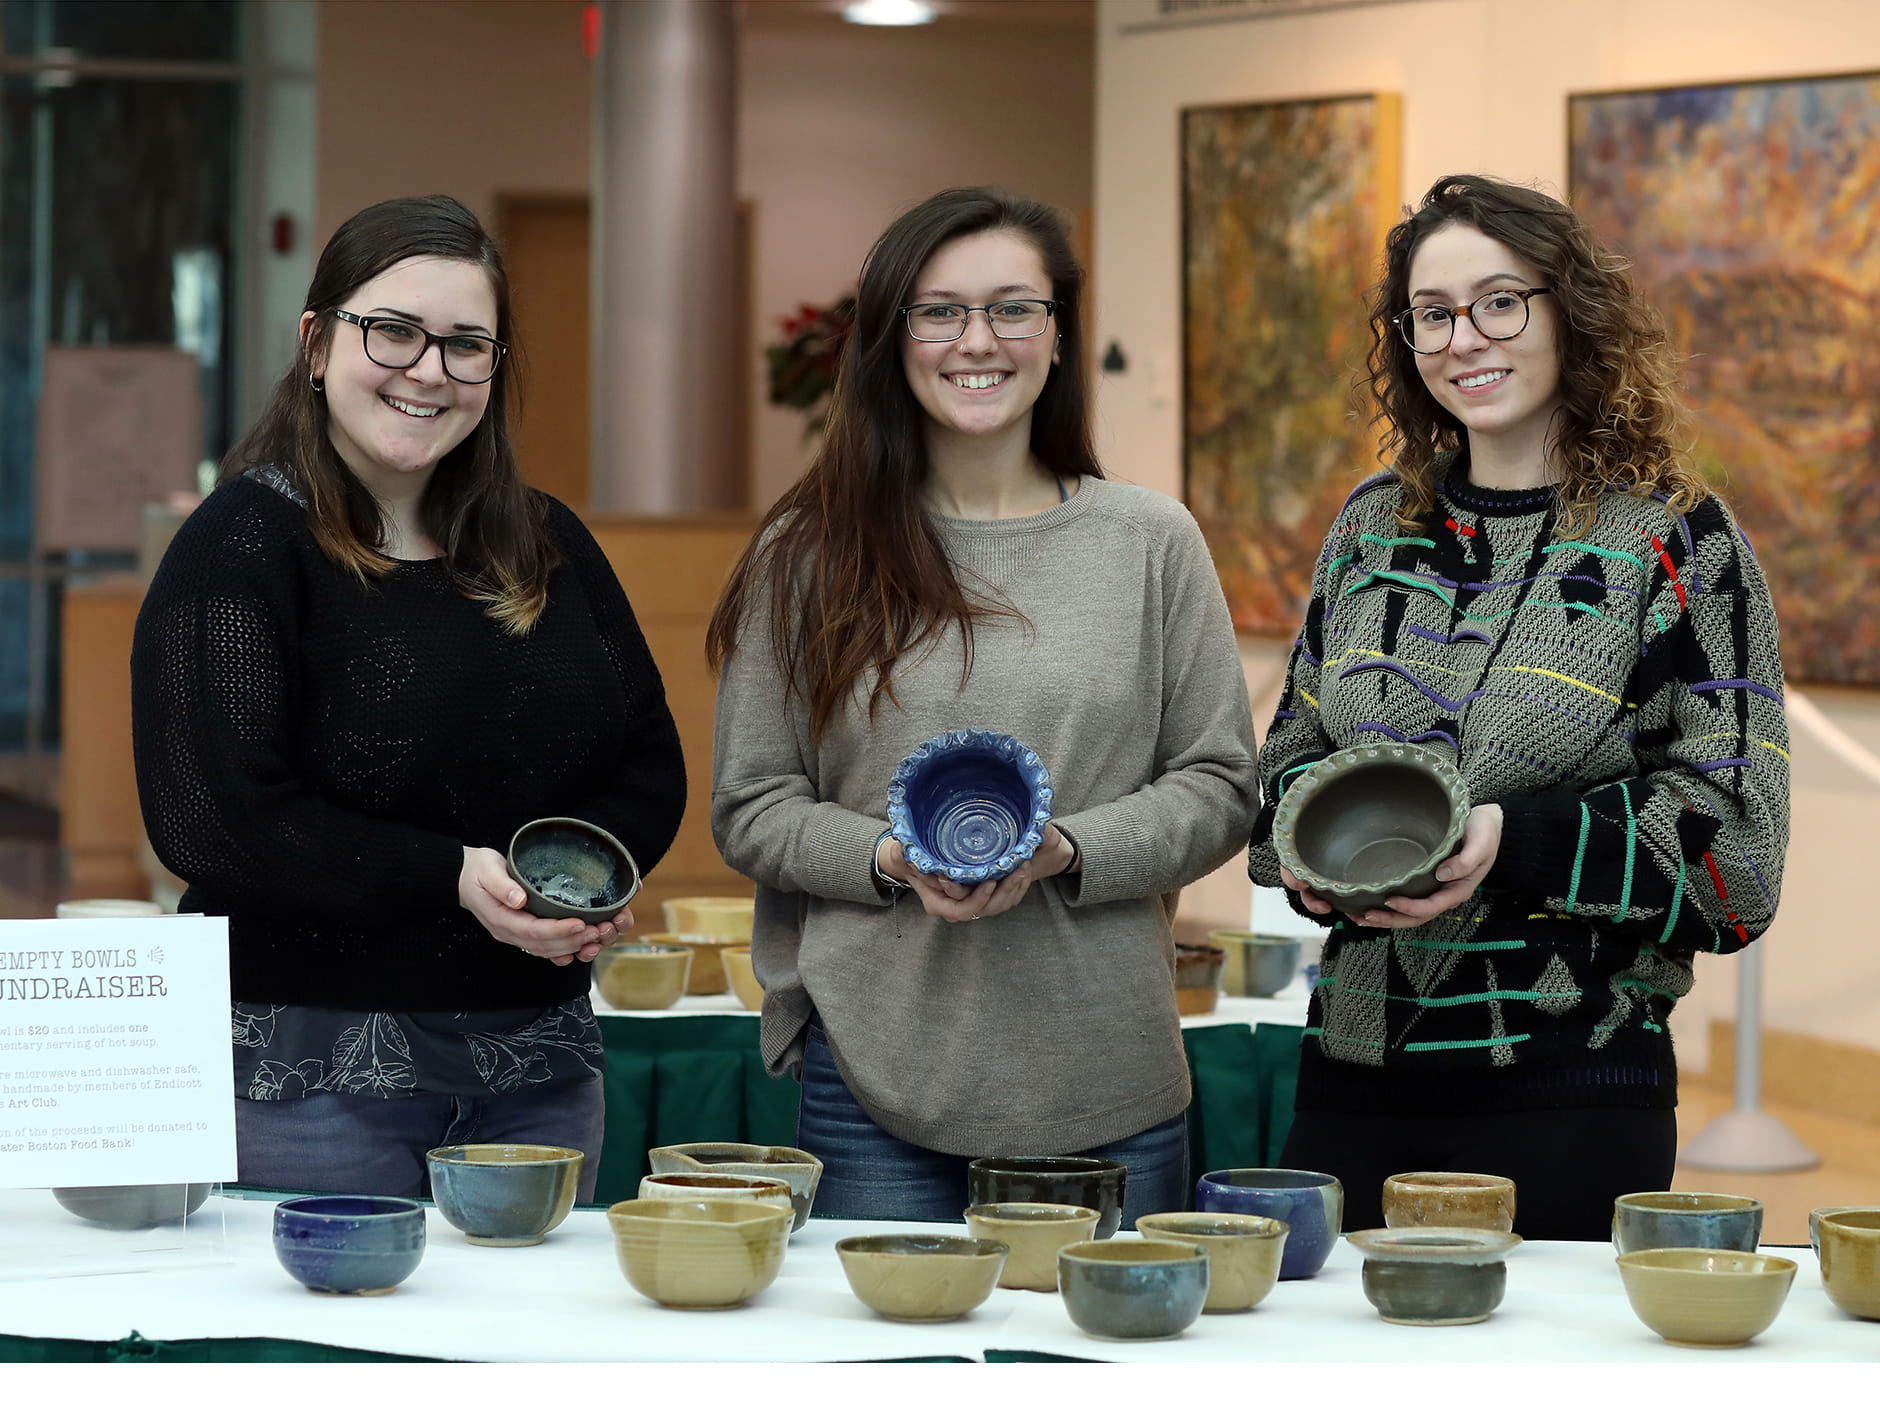 Students hold handmade ceramic bowls at the Empty Bowls Fundraiser in the Walter J. Manninen Center for the Arts atrium